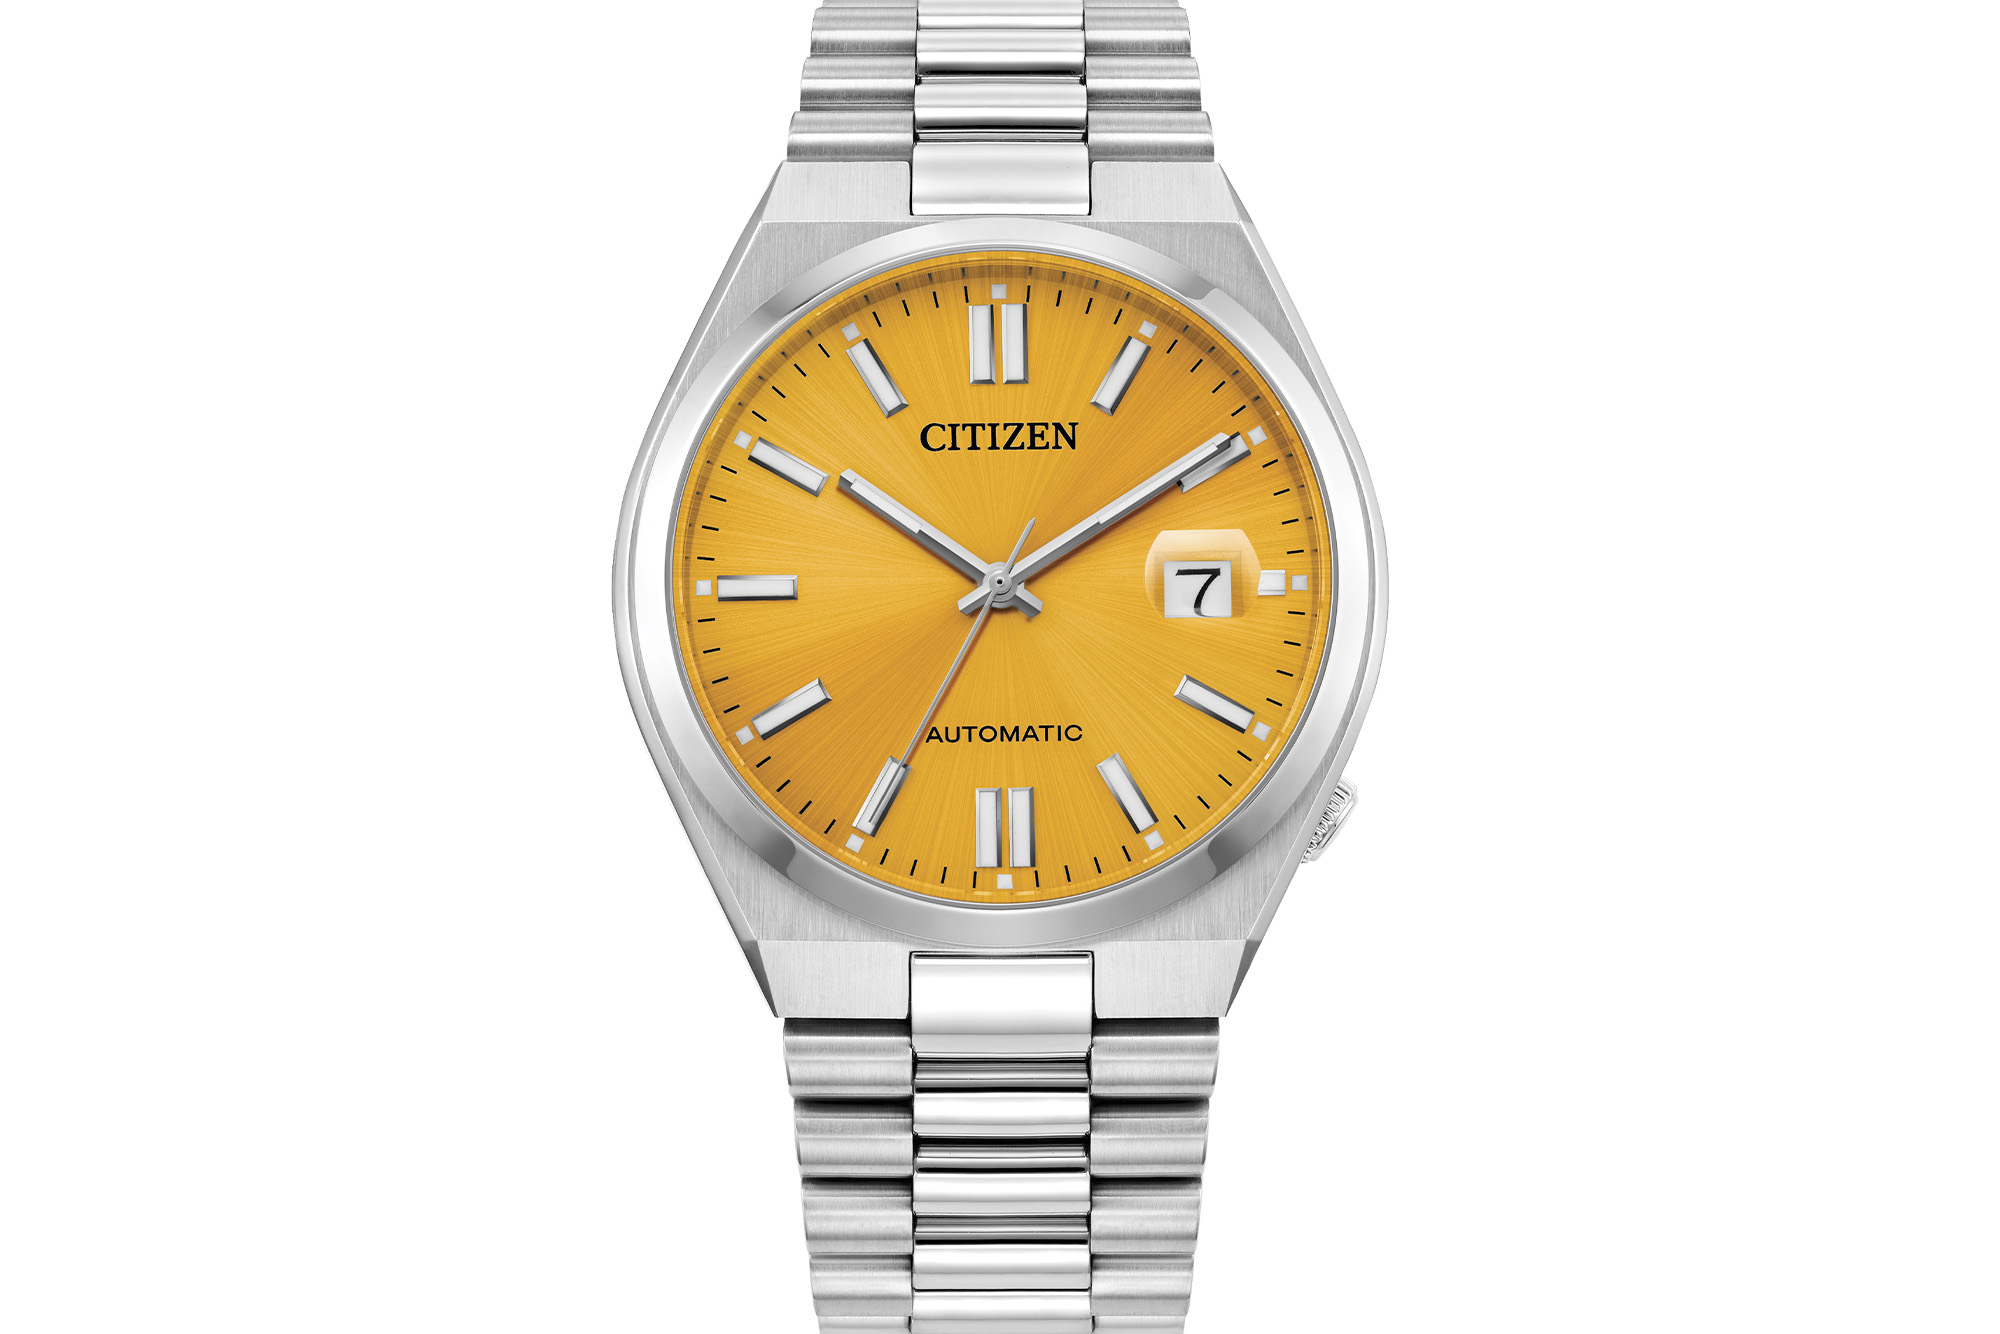 Citizen NJ015 Automatic Series “Tsuyosa” close up on yellow dial front view